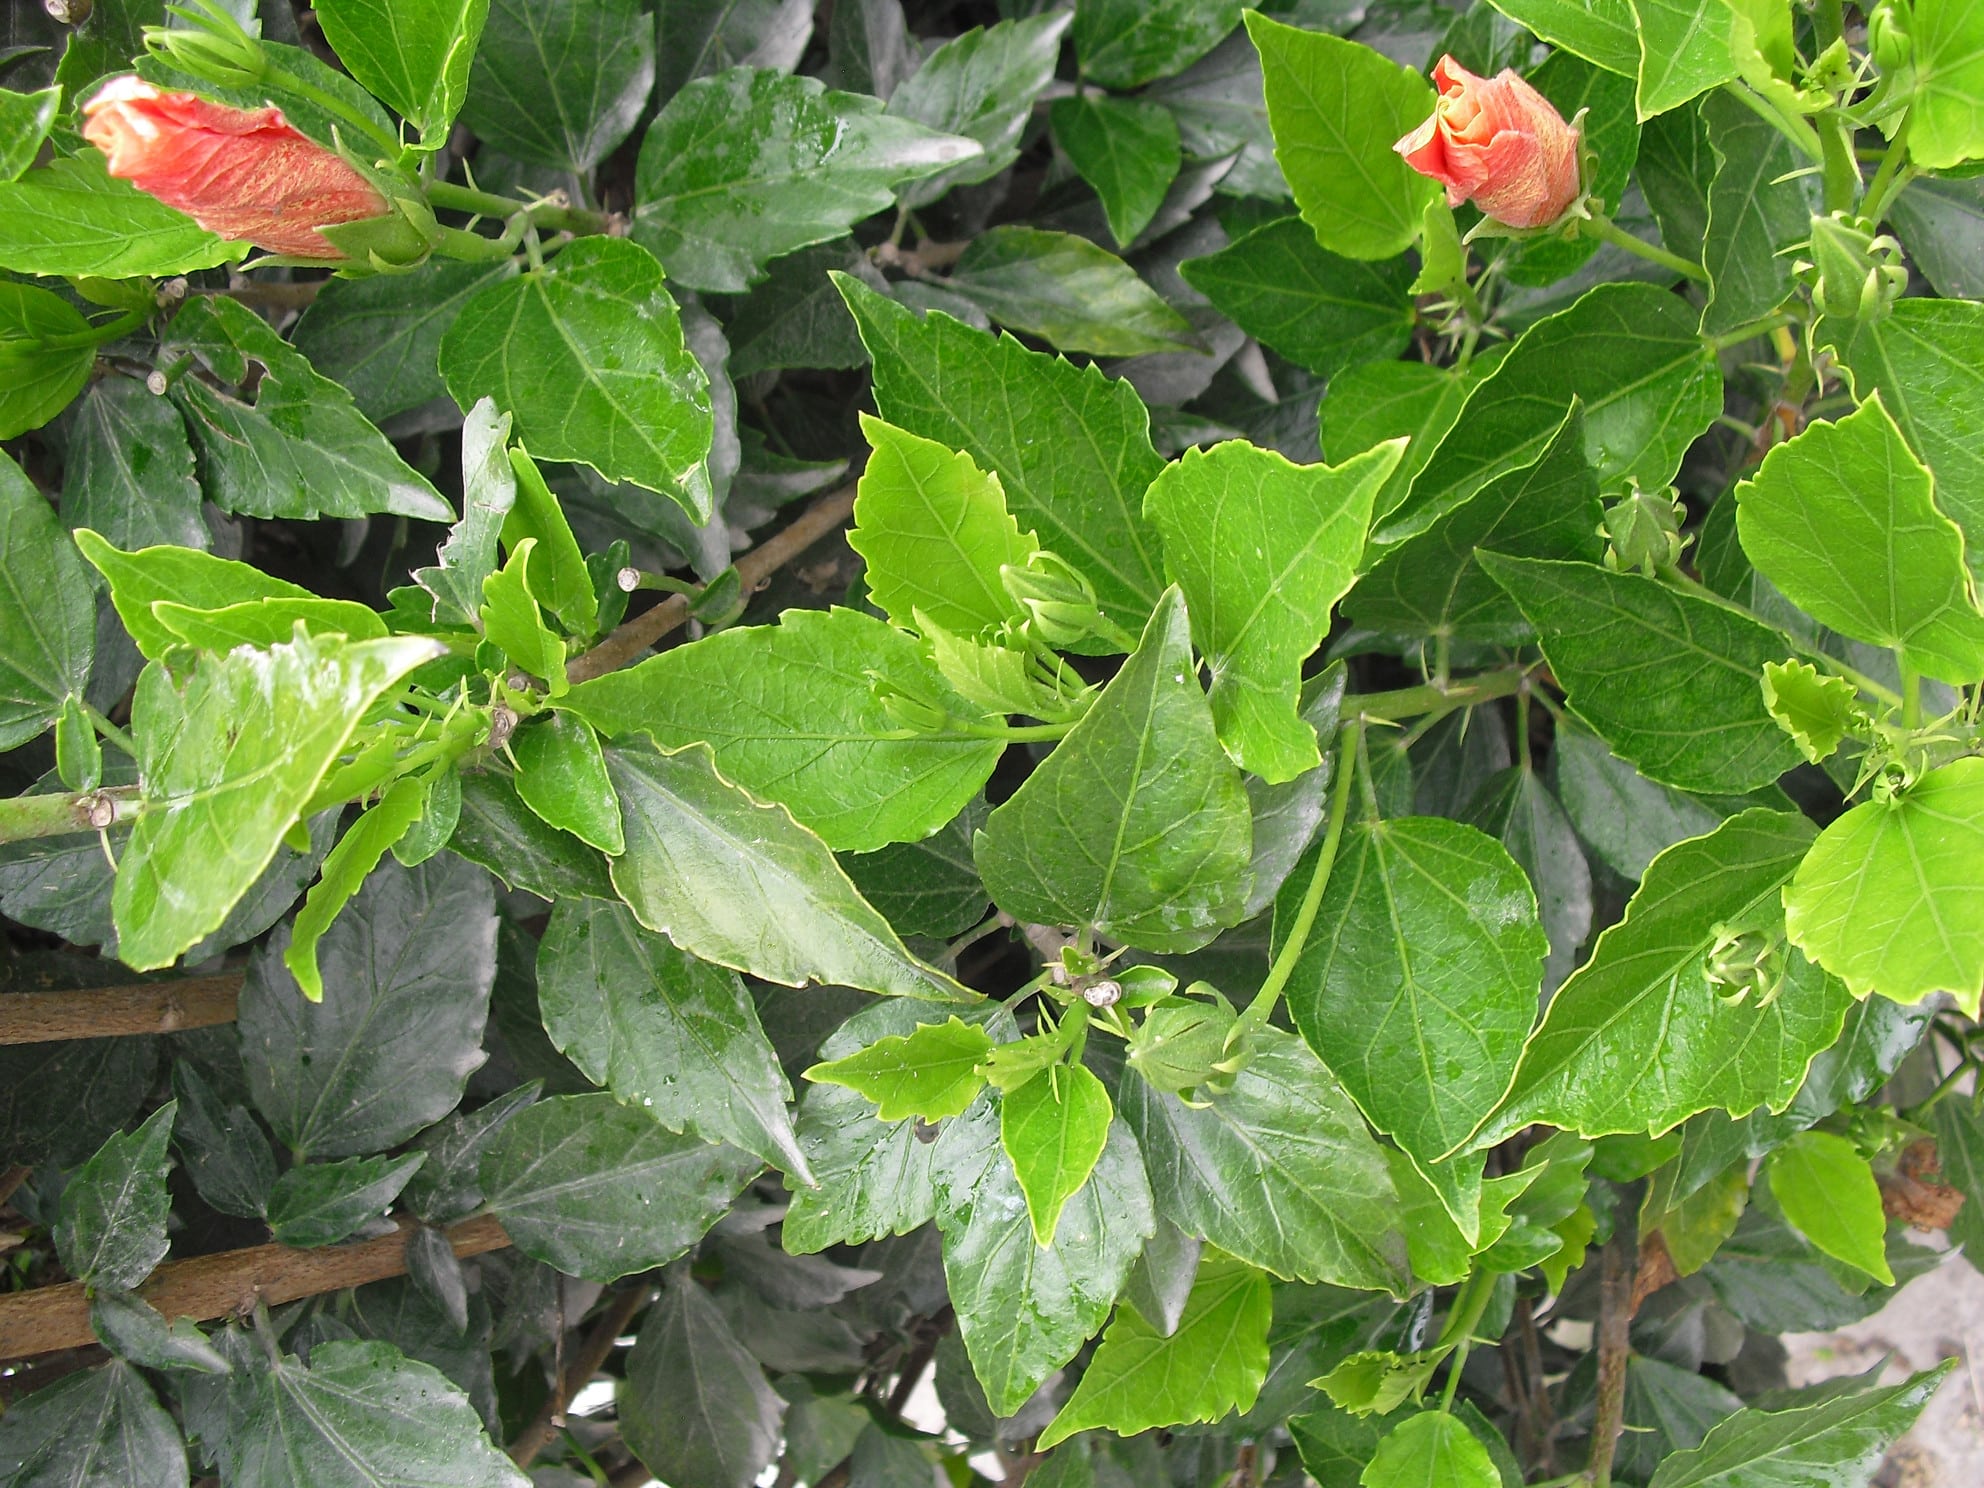 Hibiscus leaves are green.